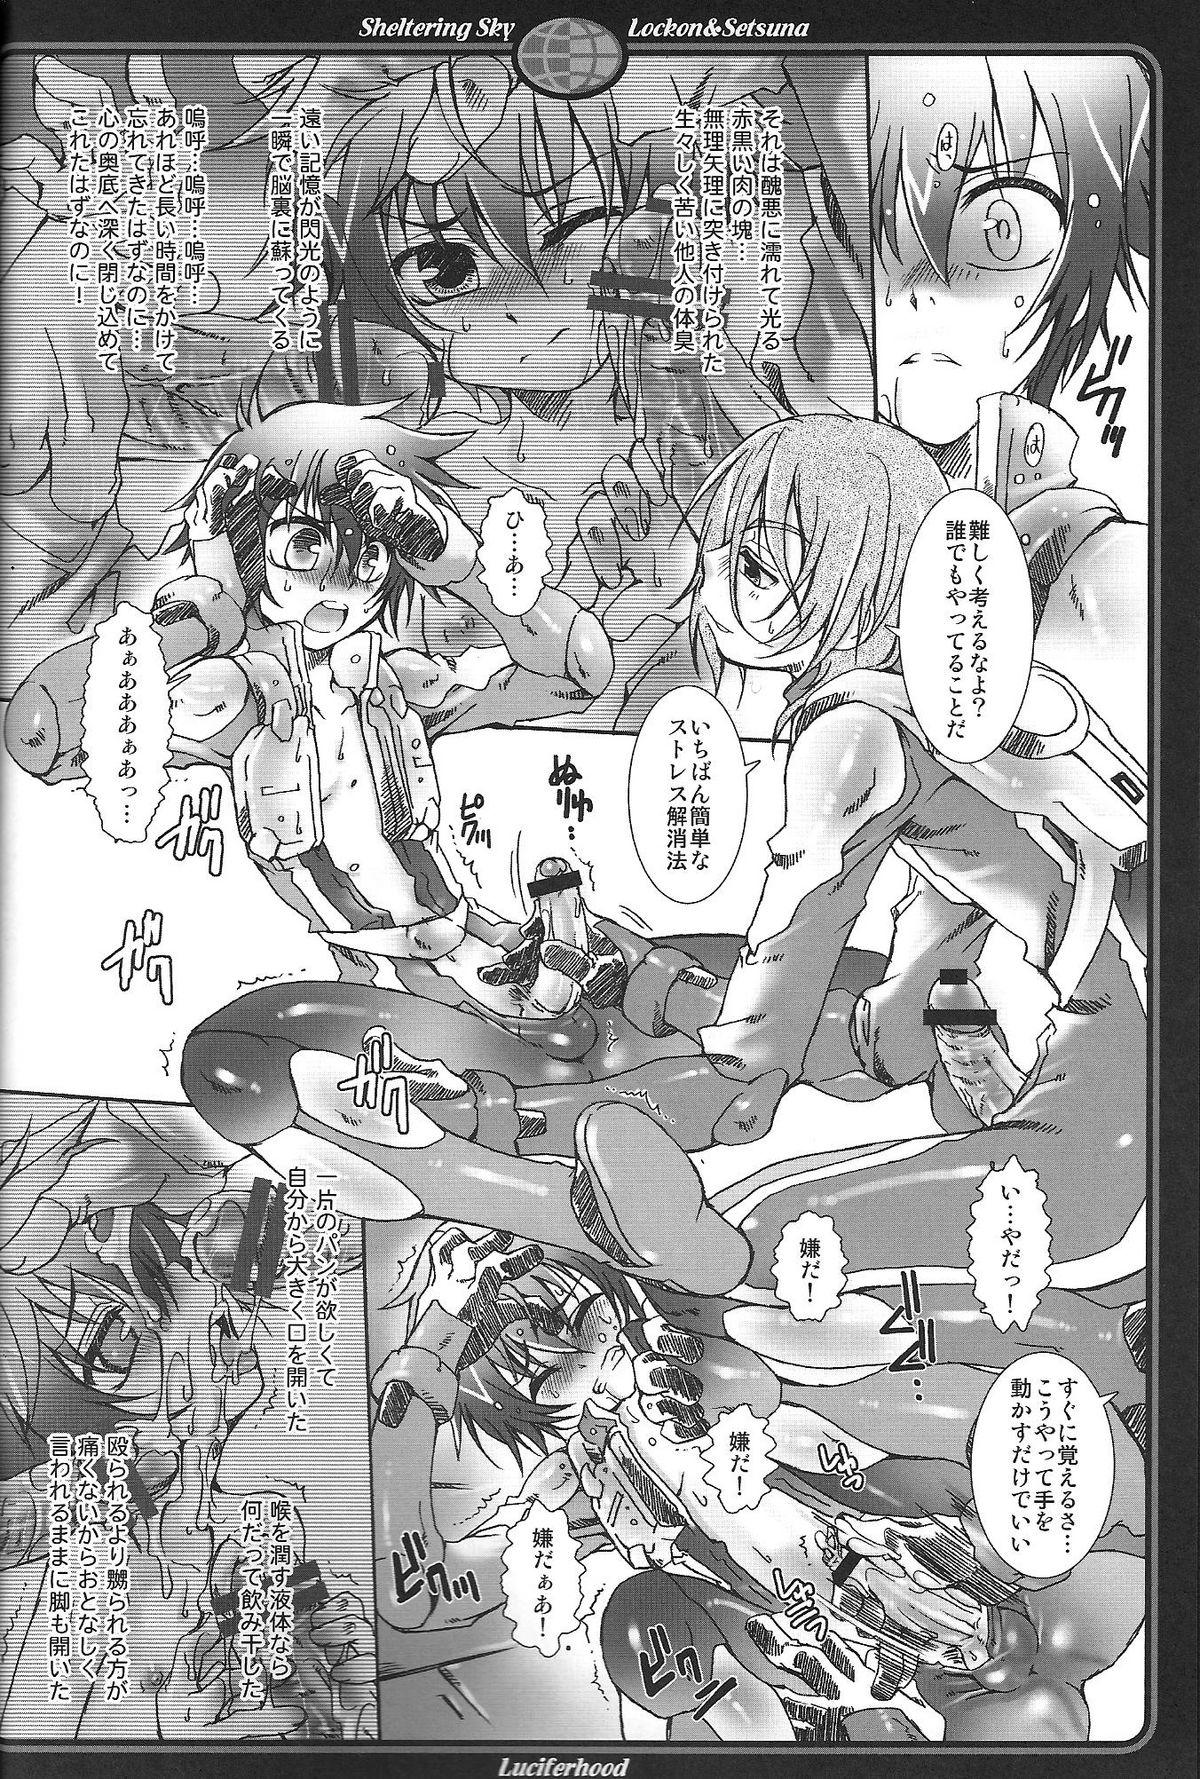 Fingering Sheltering Sky - Gundam 00 Lolicon - Page 11